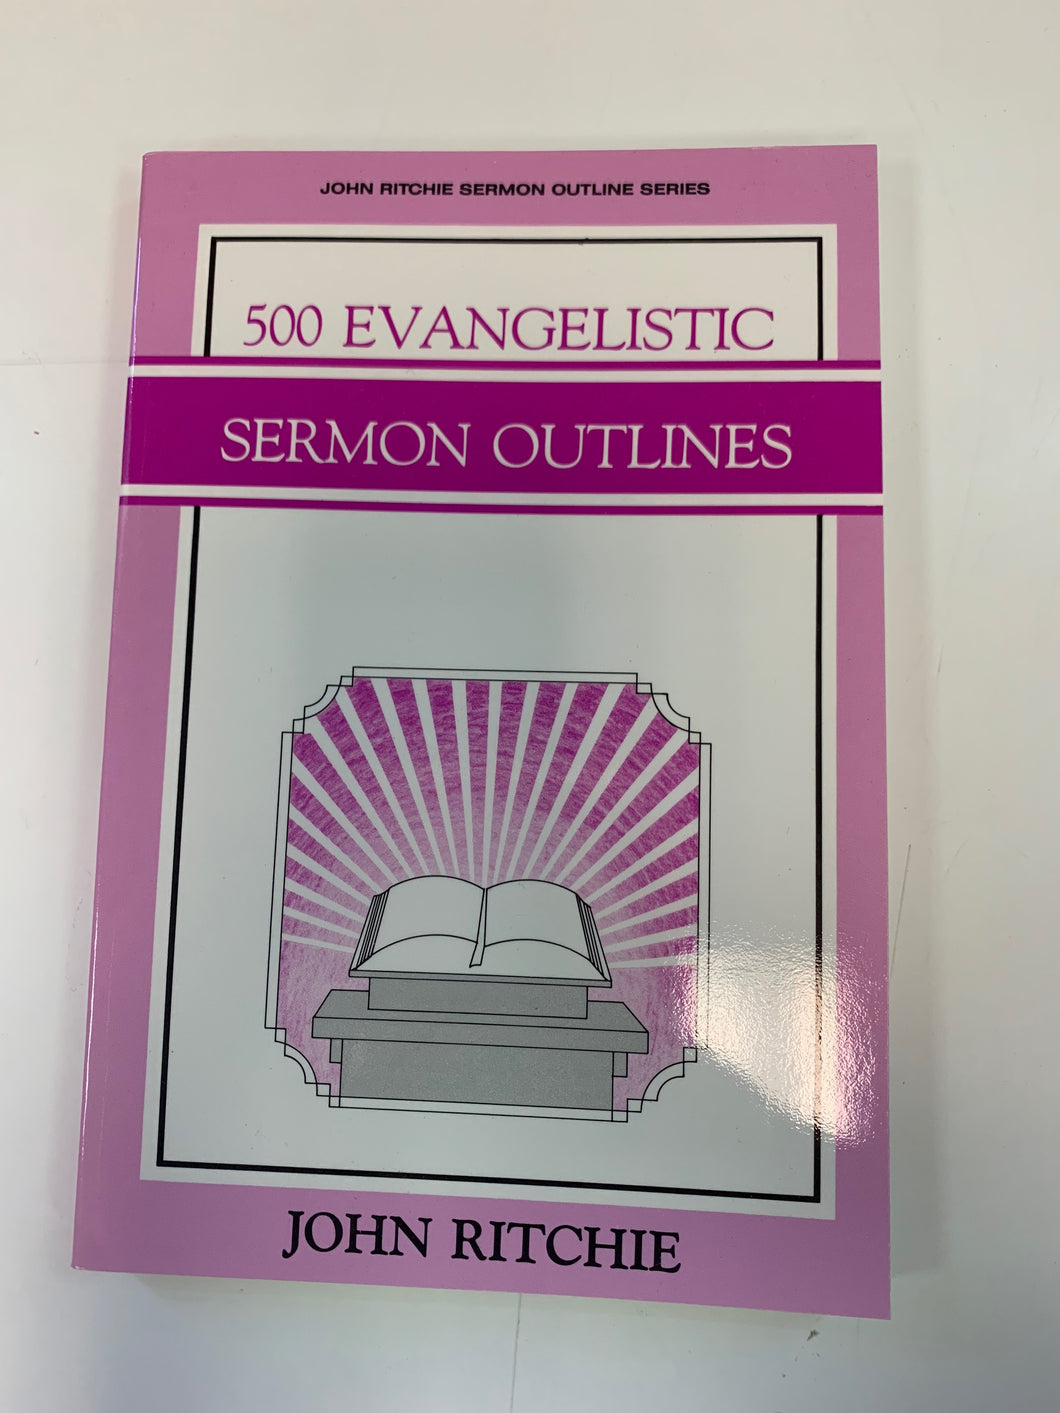 500 Evangelistic Sermon Outlines by John Ritchie